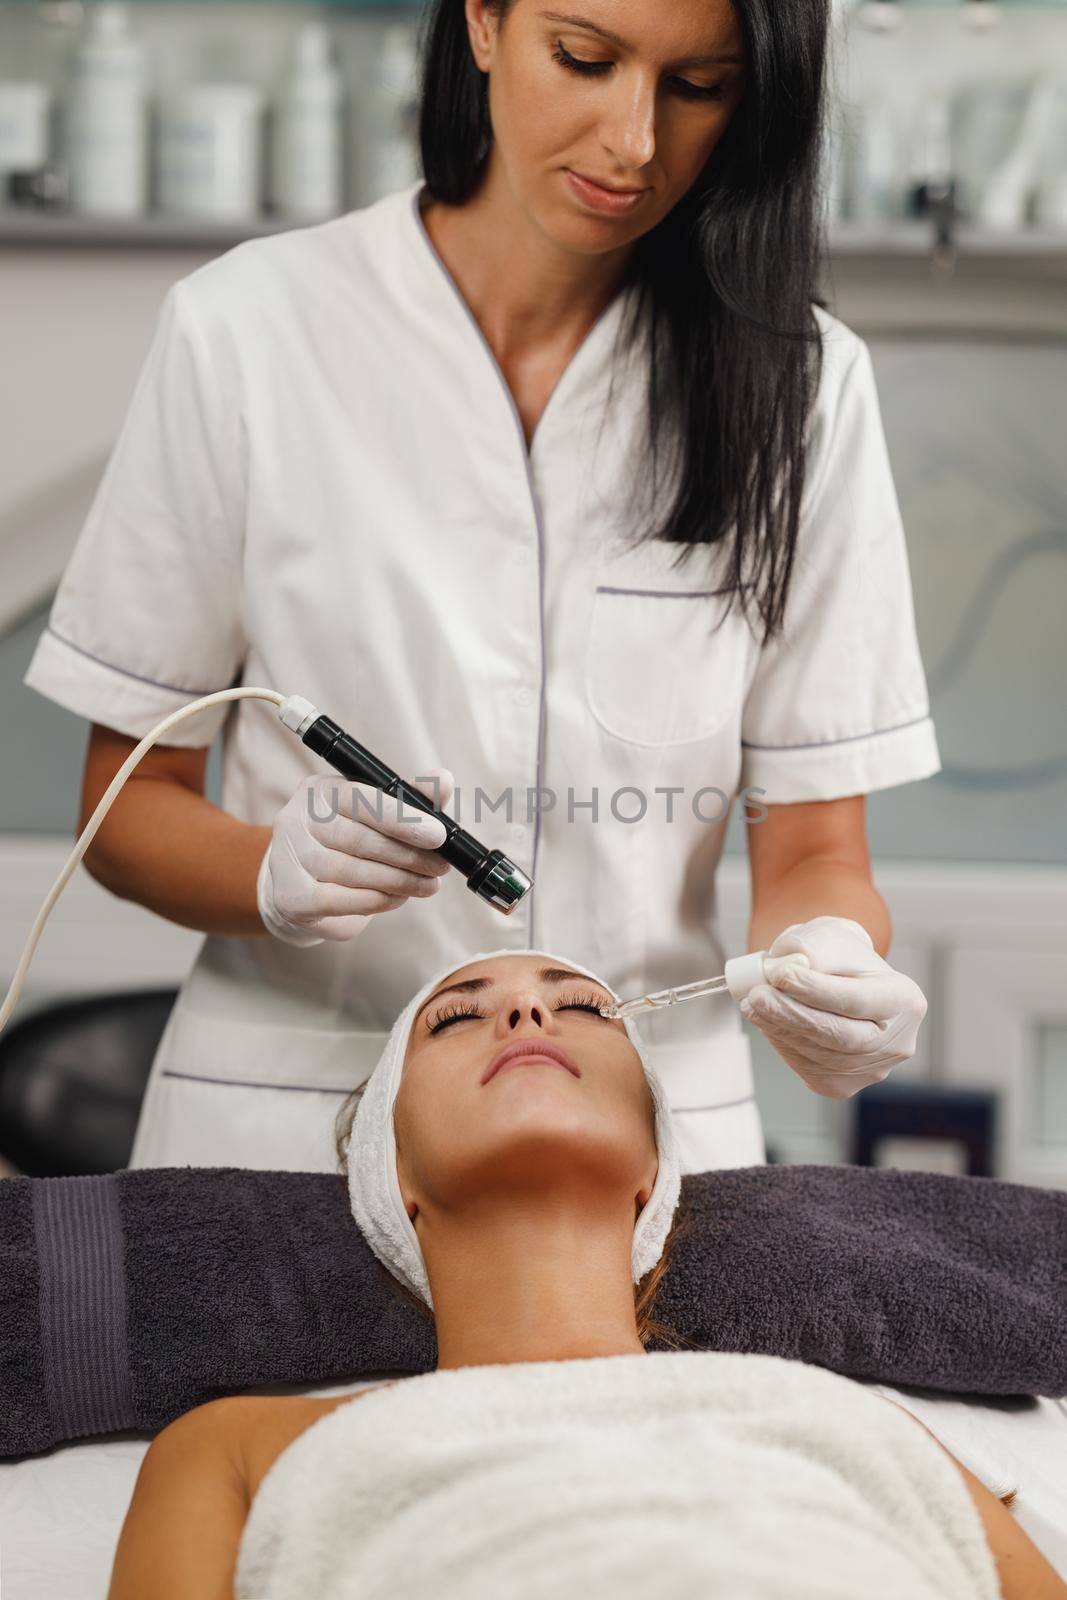 Mesotherapy Non Needle Treatment In A Beauty Salon by MilanMarkovic78